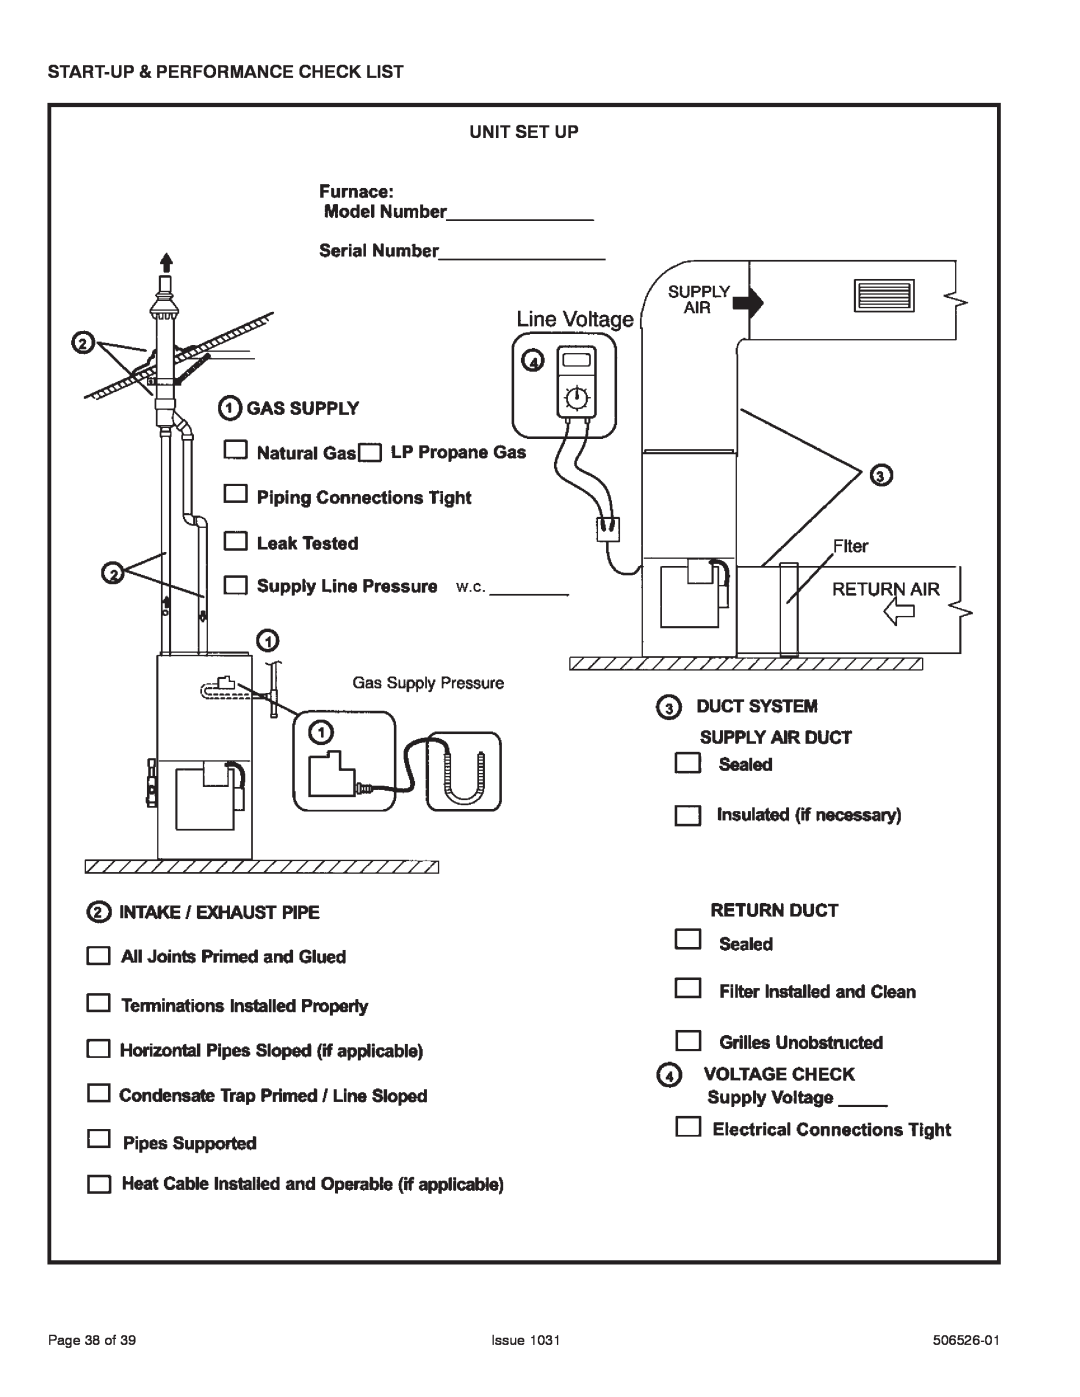 Allied Air Enterprises A80UH, 80G1UH Start-Up& Performance Check List Unit Set Up, Page 38 of, Issue, 506526-01 